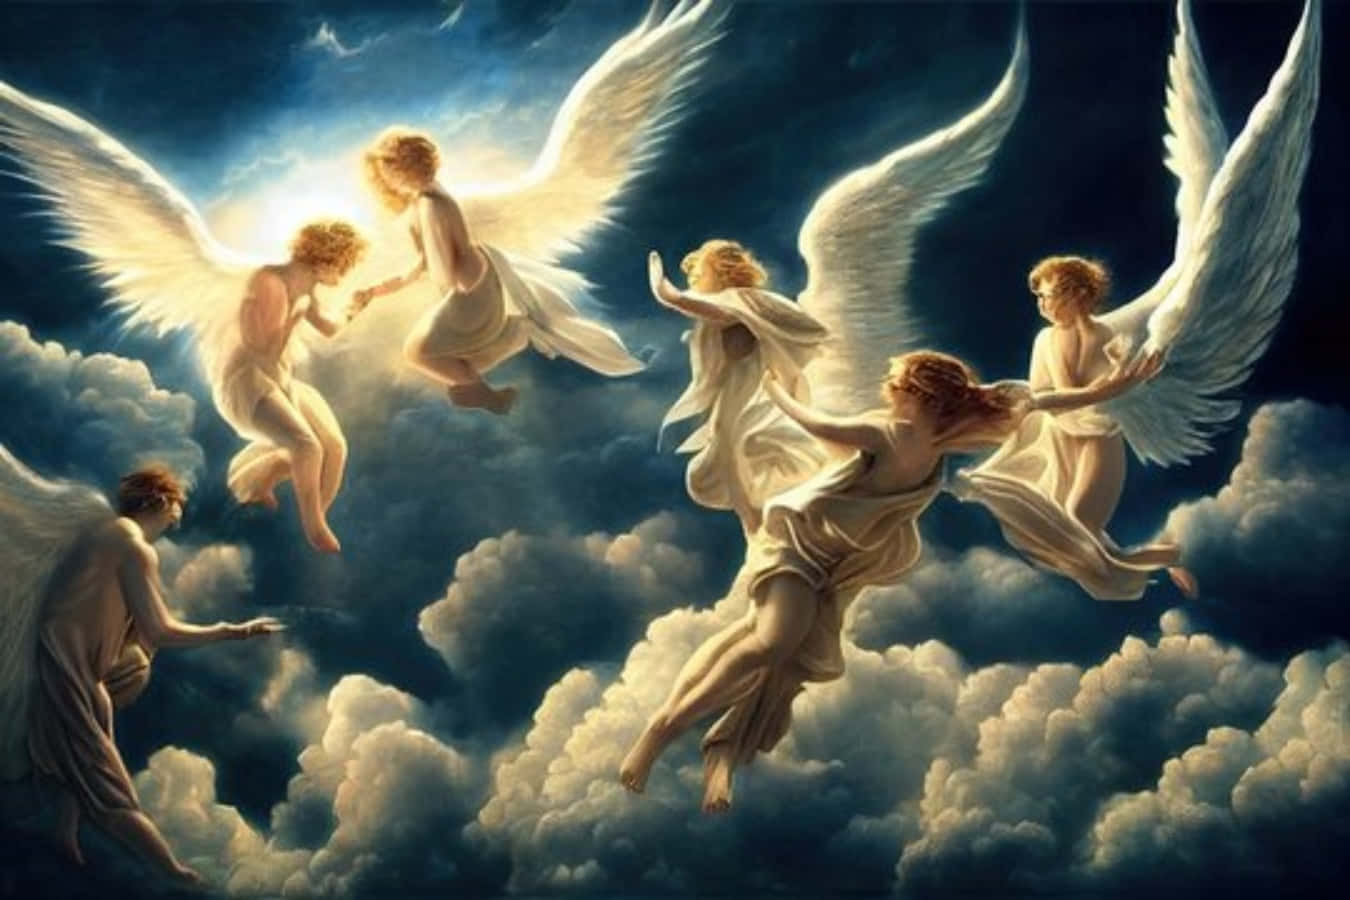 The power of the angels of God strengthen and protects those who turn to Him.